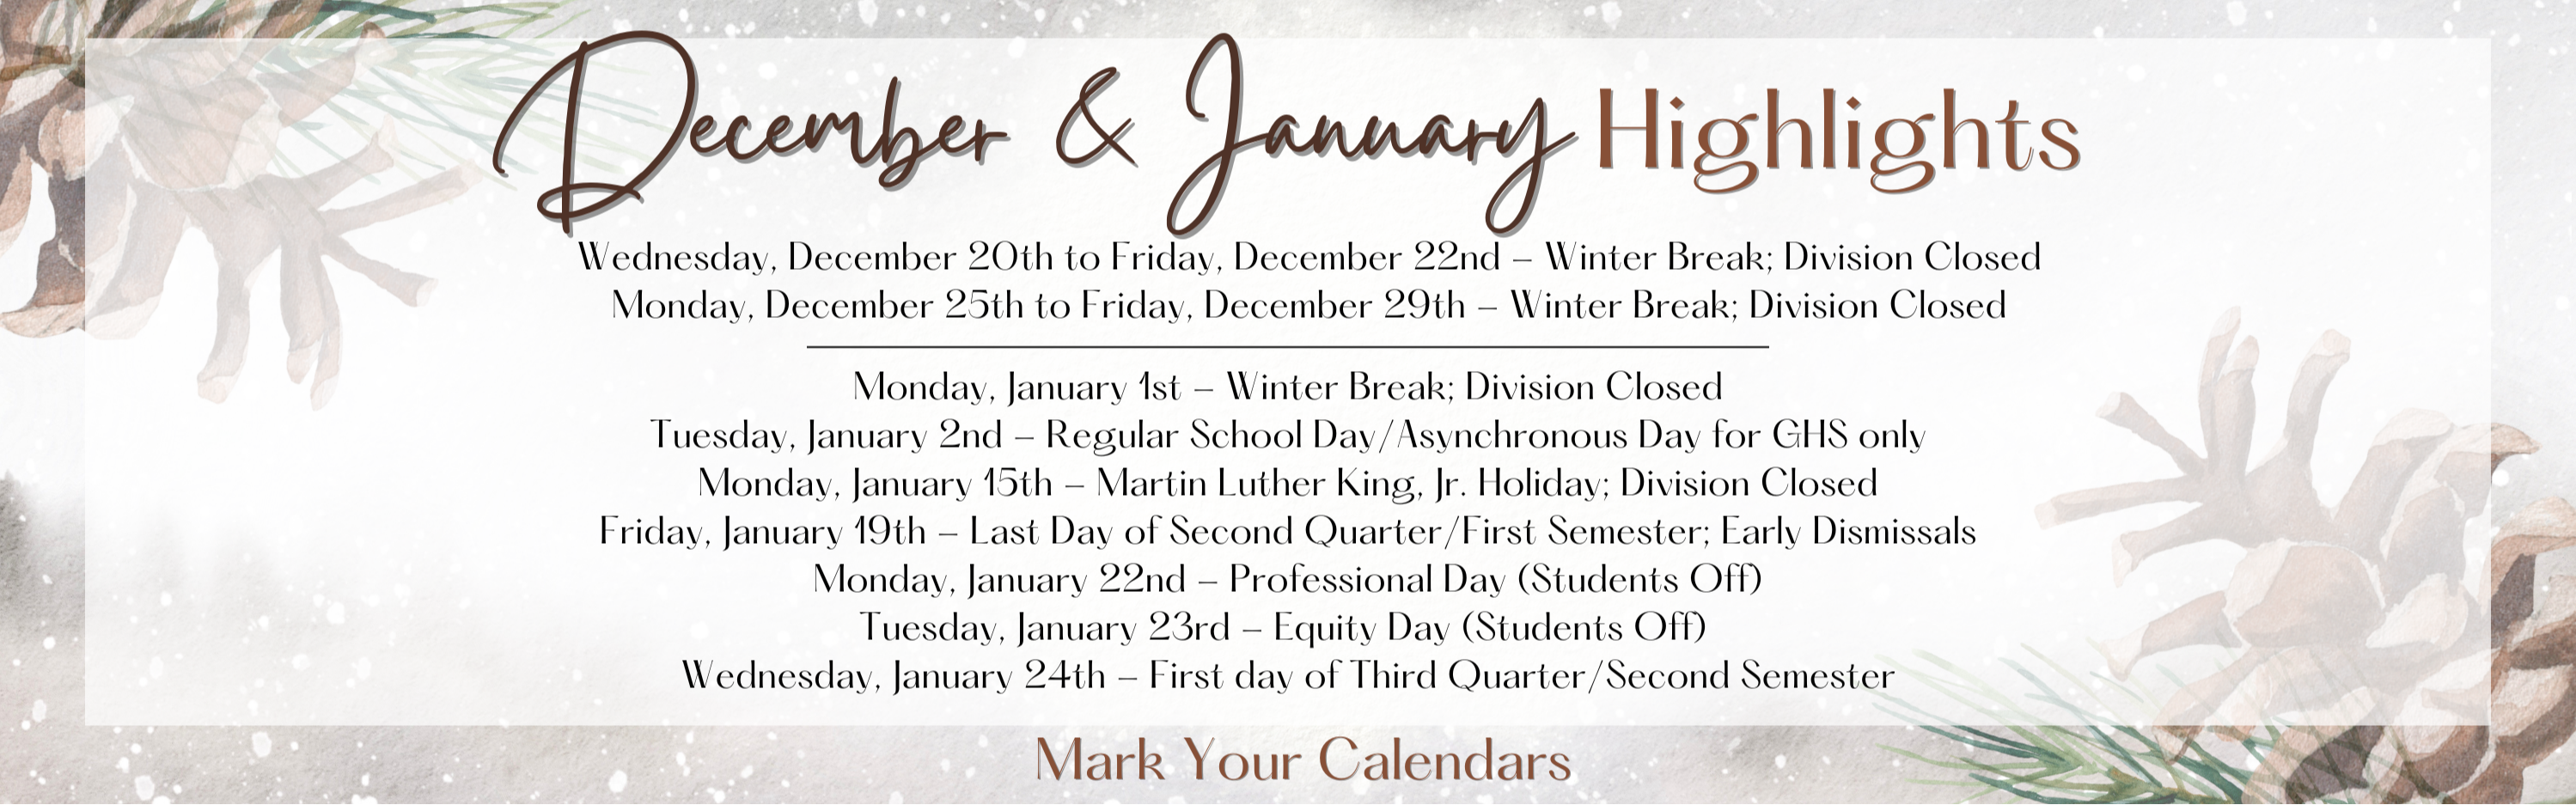 December and January highlights. Calendar dates to note